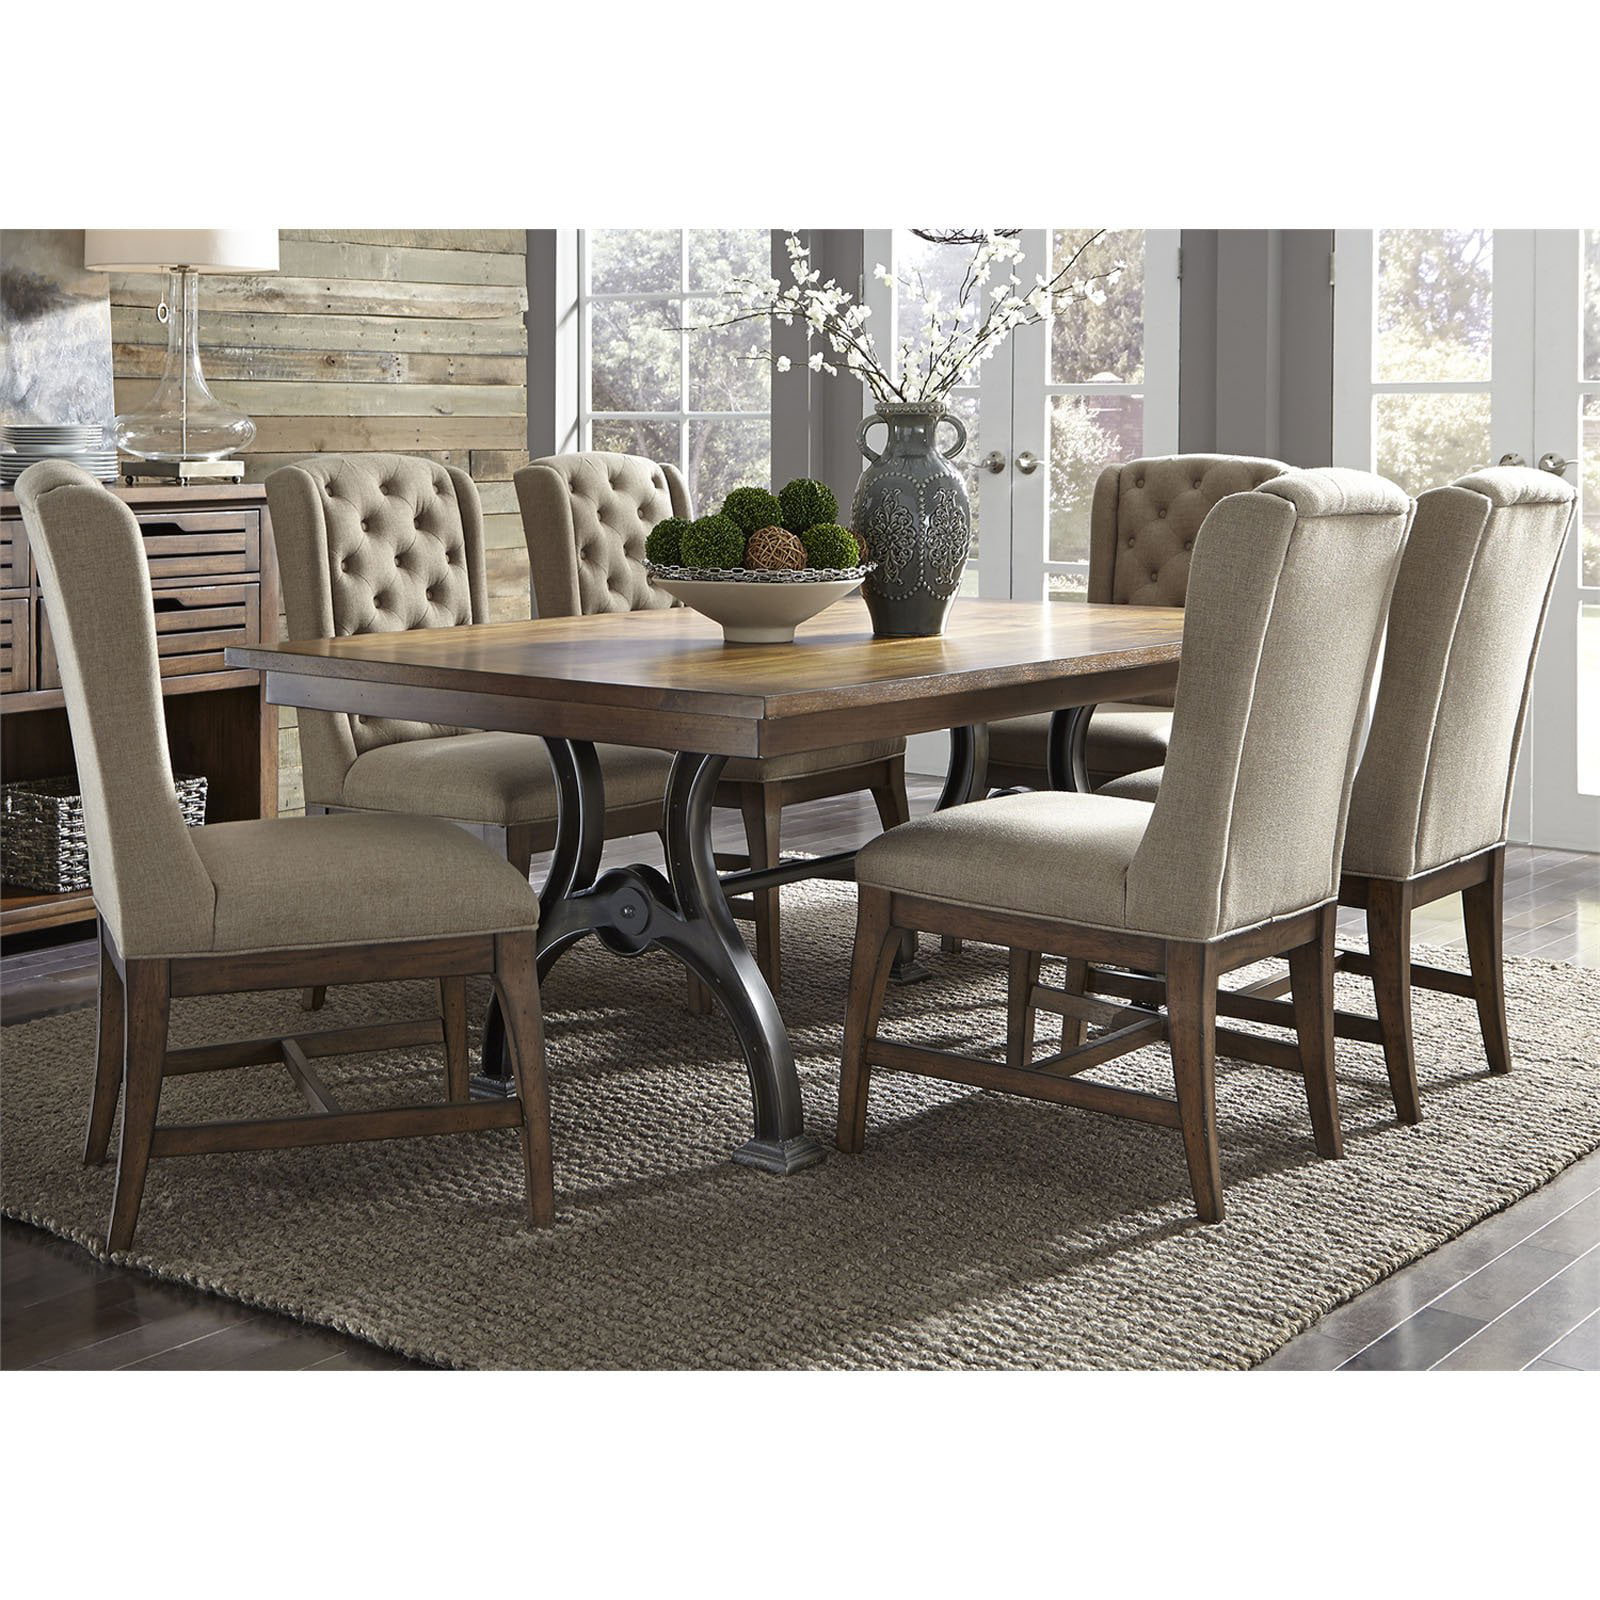 Liberty Furniture Industries Arlington House 7 Piece Upholstered